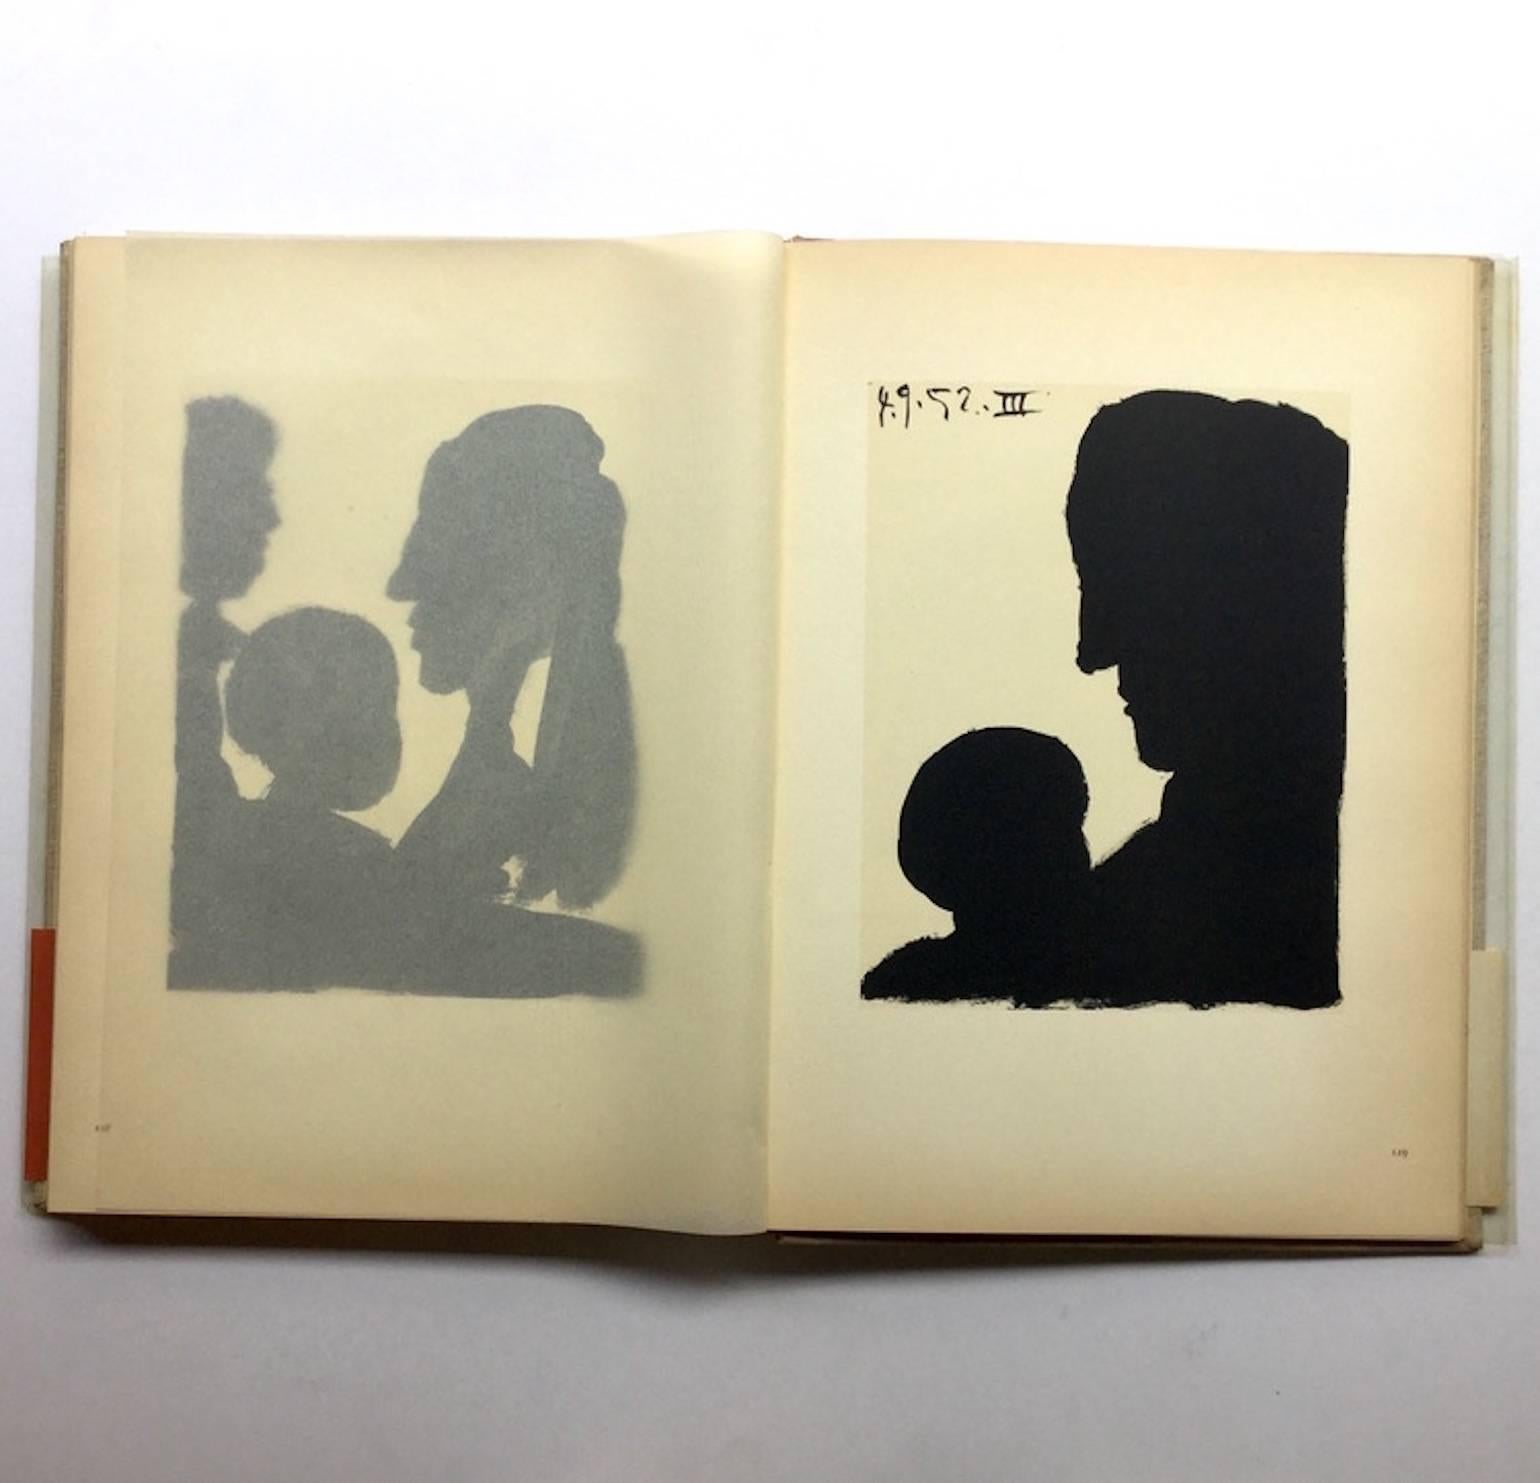 First edition, published by Éditions Cercle d'Art, Paris, 1954.

La Guerre et la Paix is a scarce and desirable Picasso monograph. This first edition has text in French by Claude Roy, and many black and white reproductions of Picasso's drawings.